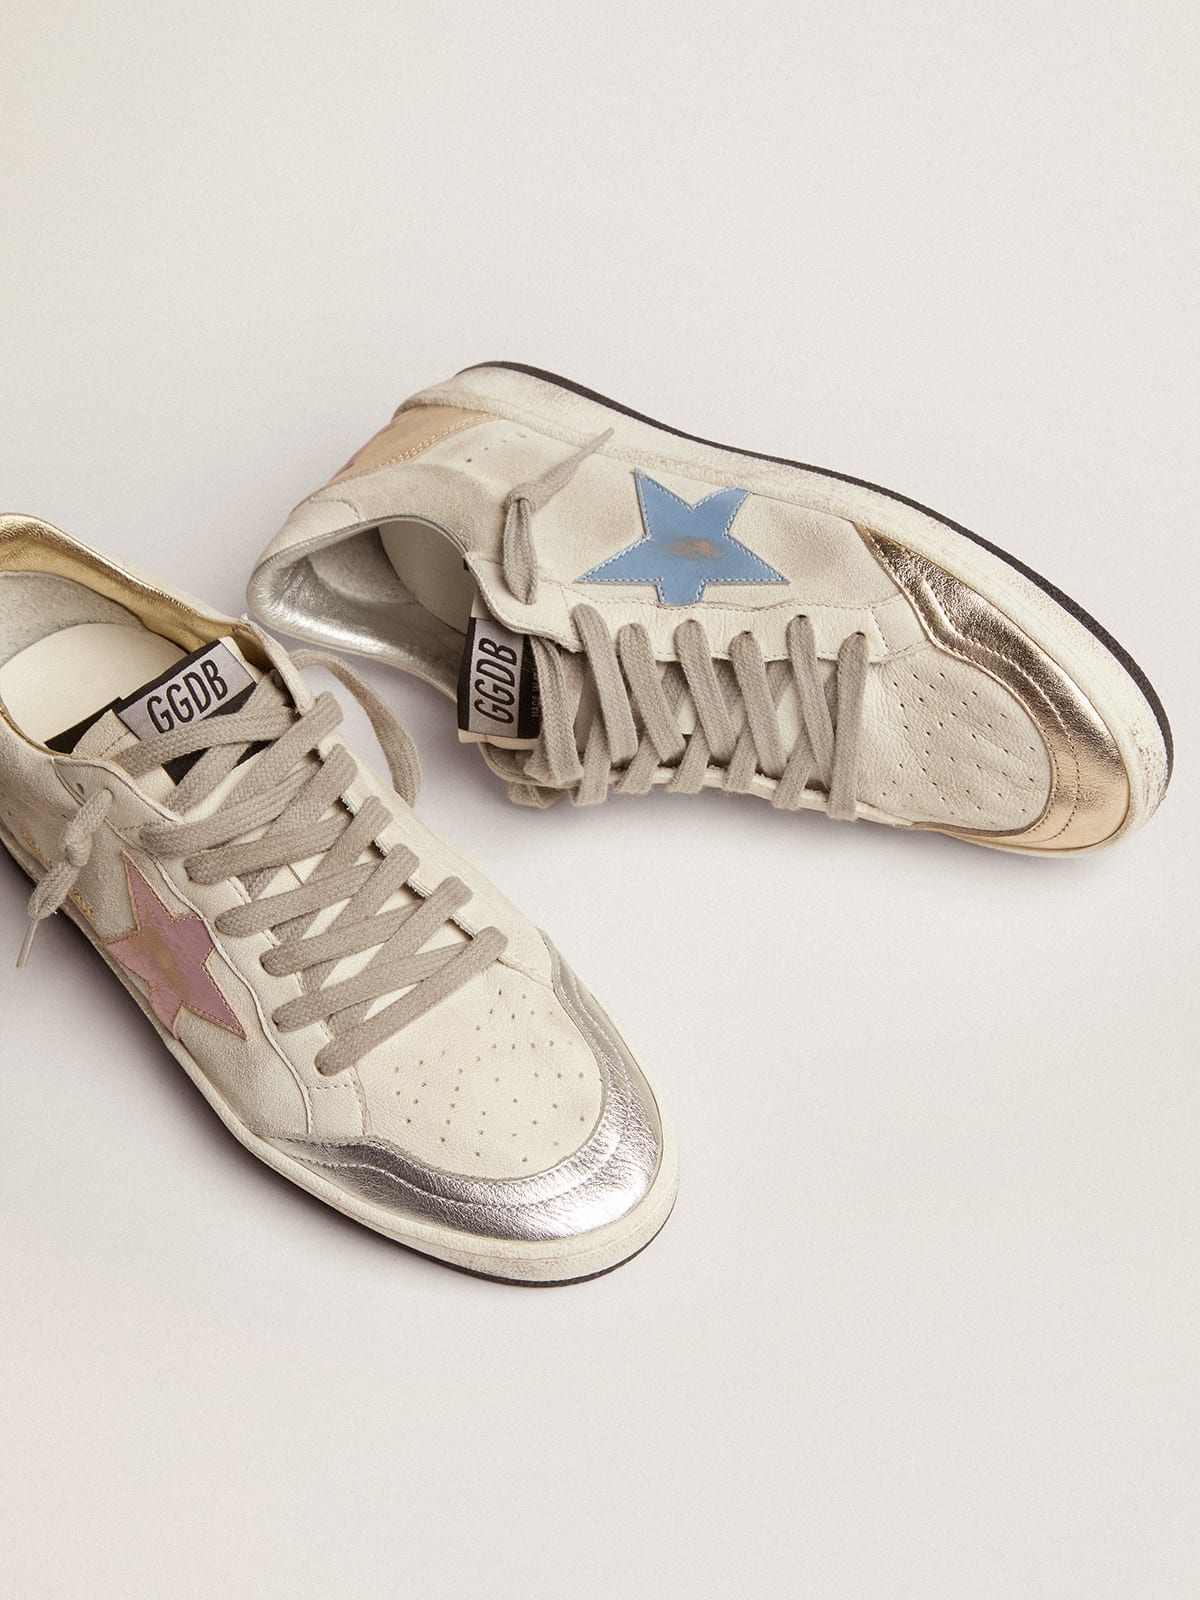 Golden Goose - Women's Ball Star in white suede with multicolor inserts in 